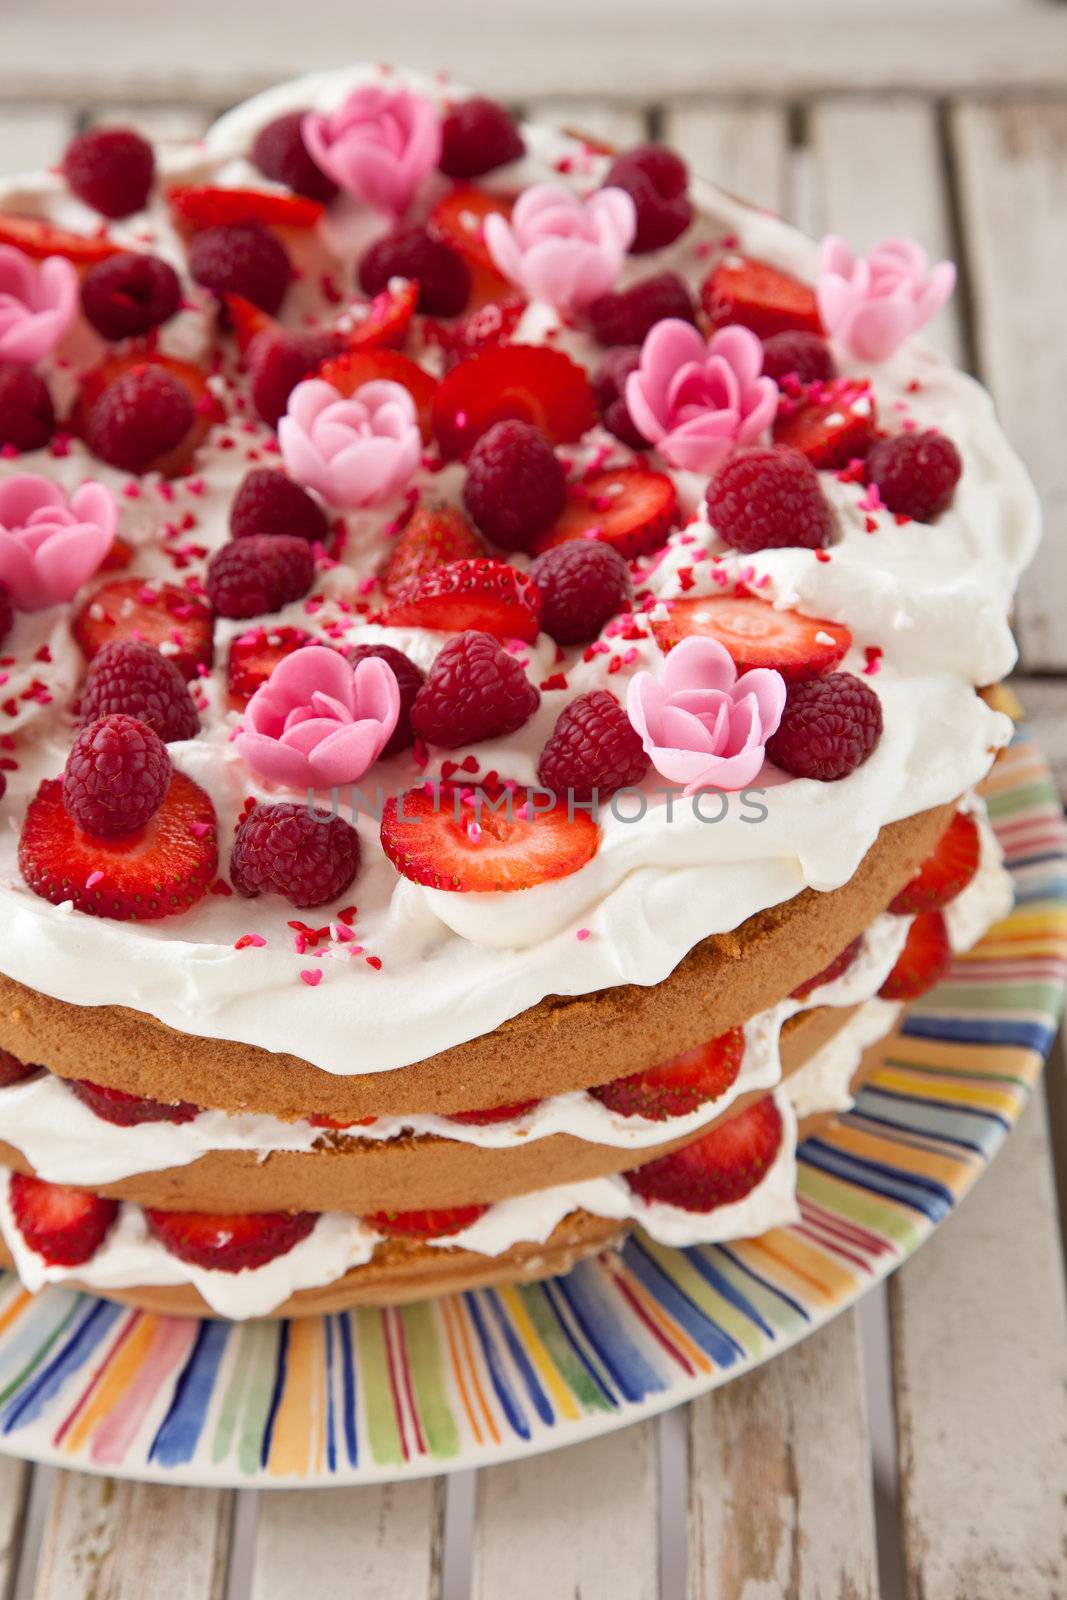 Delicious layered birthday cake dressed with fruit, whipped cream and marzipan flowers